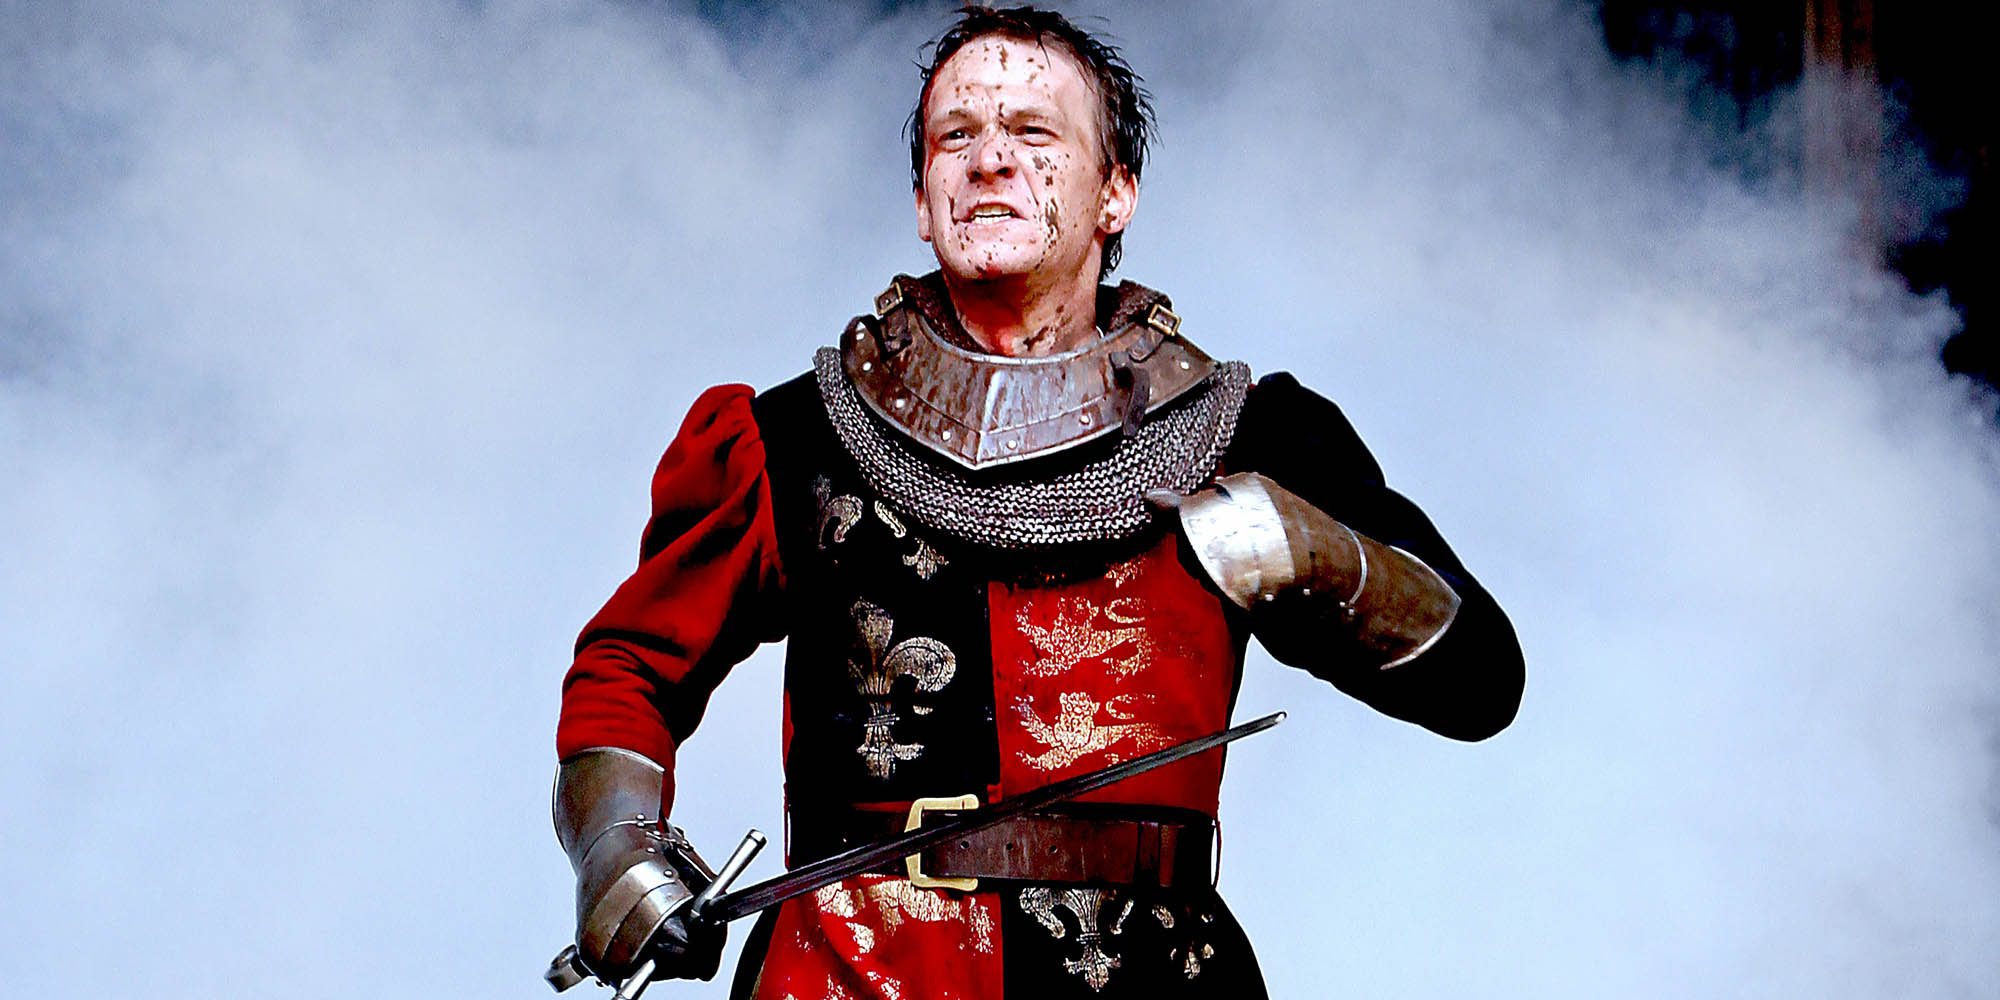 An actor wearing a traditional red and black English medieval military uniform runs holding a sword, with smoke billowing out behind them